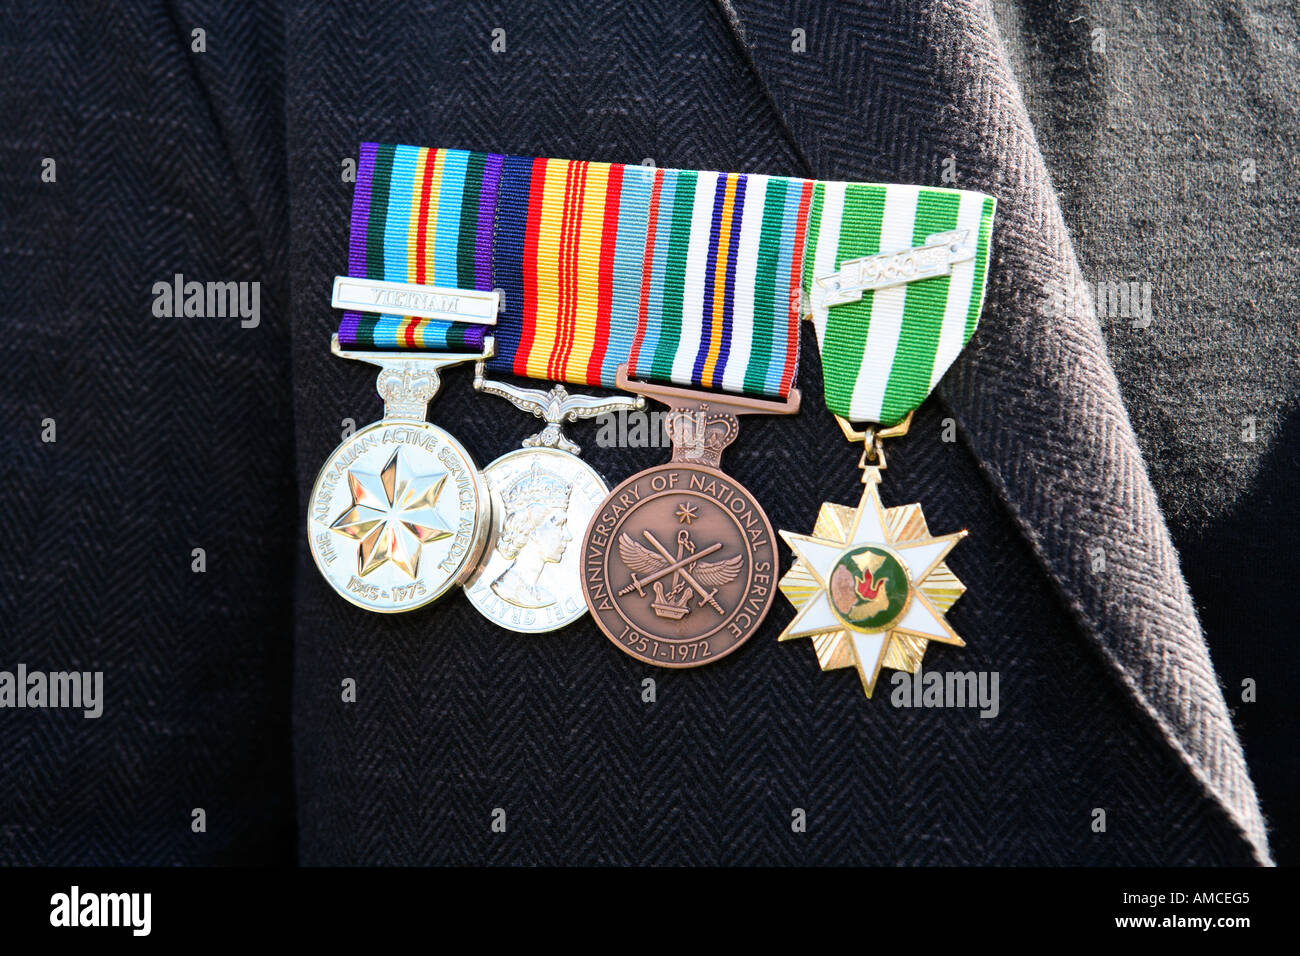 Four medals of bravery worn by war veteran on Anzac day, Australia Stock Photo